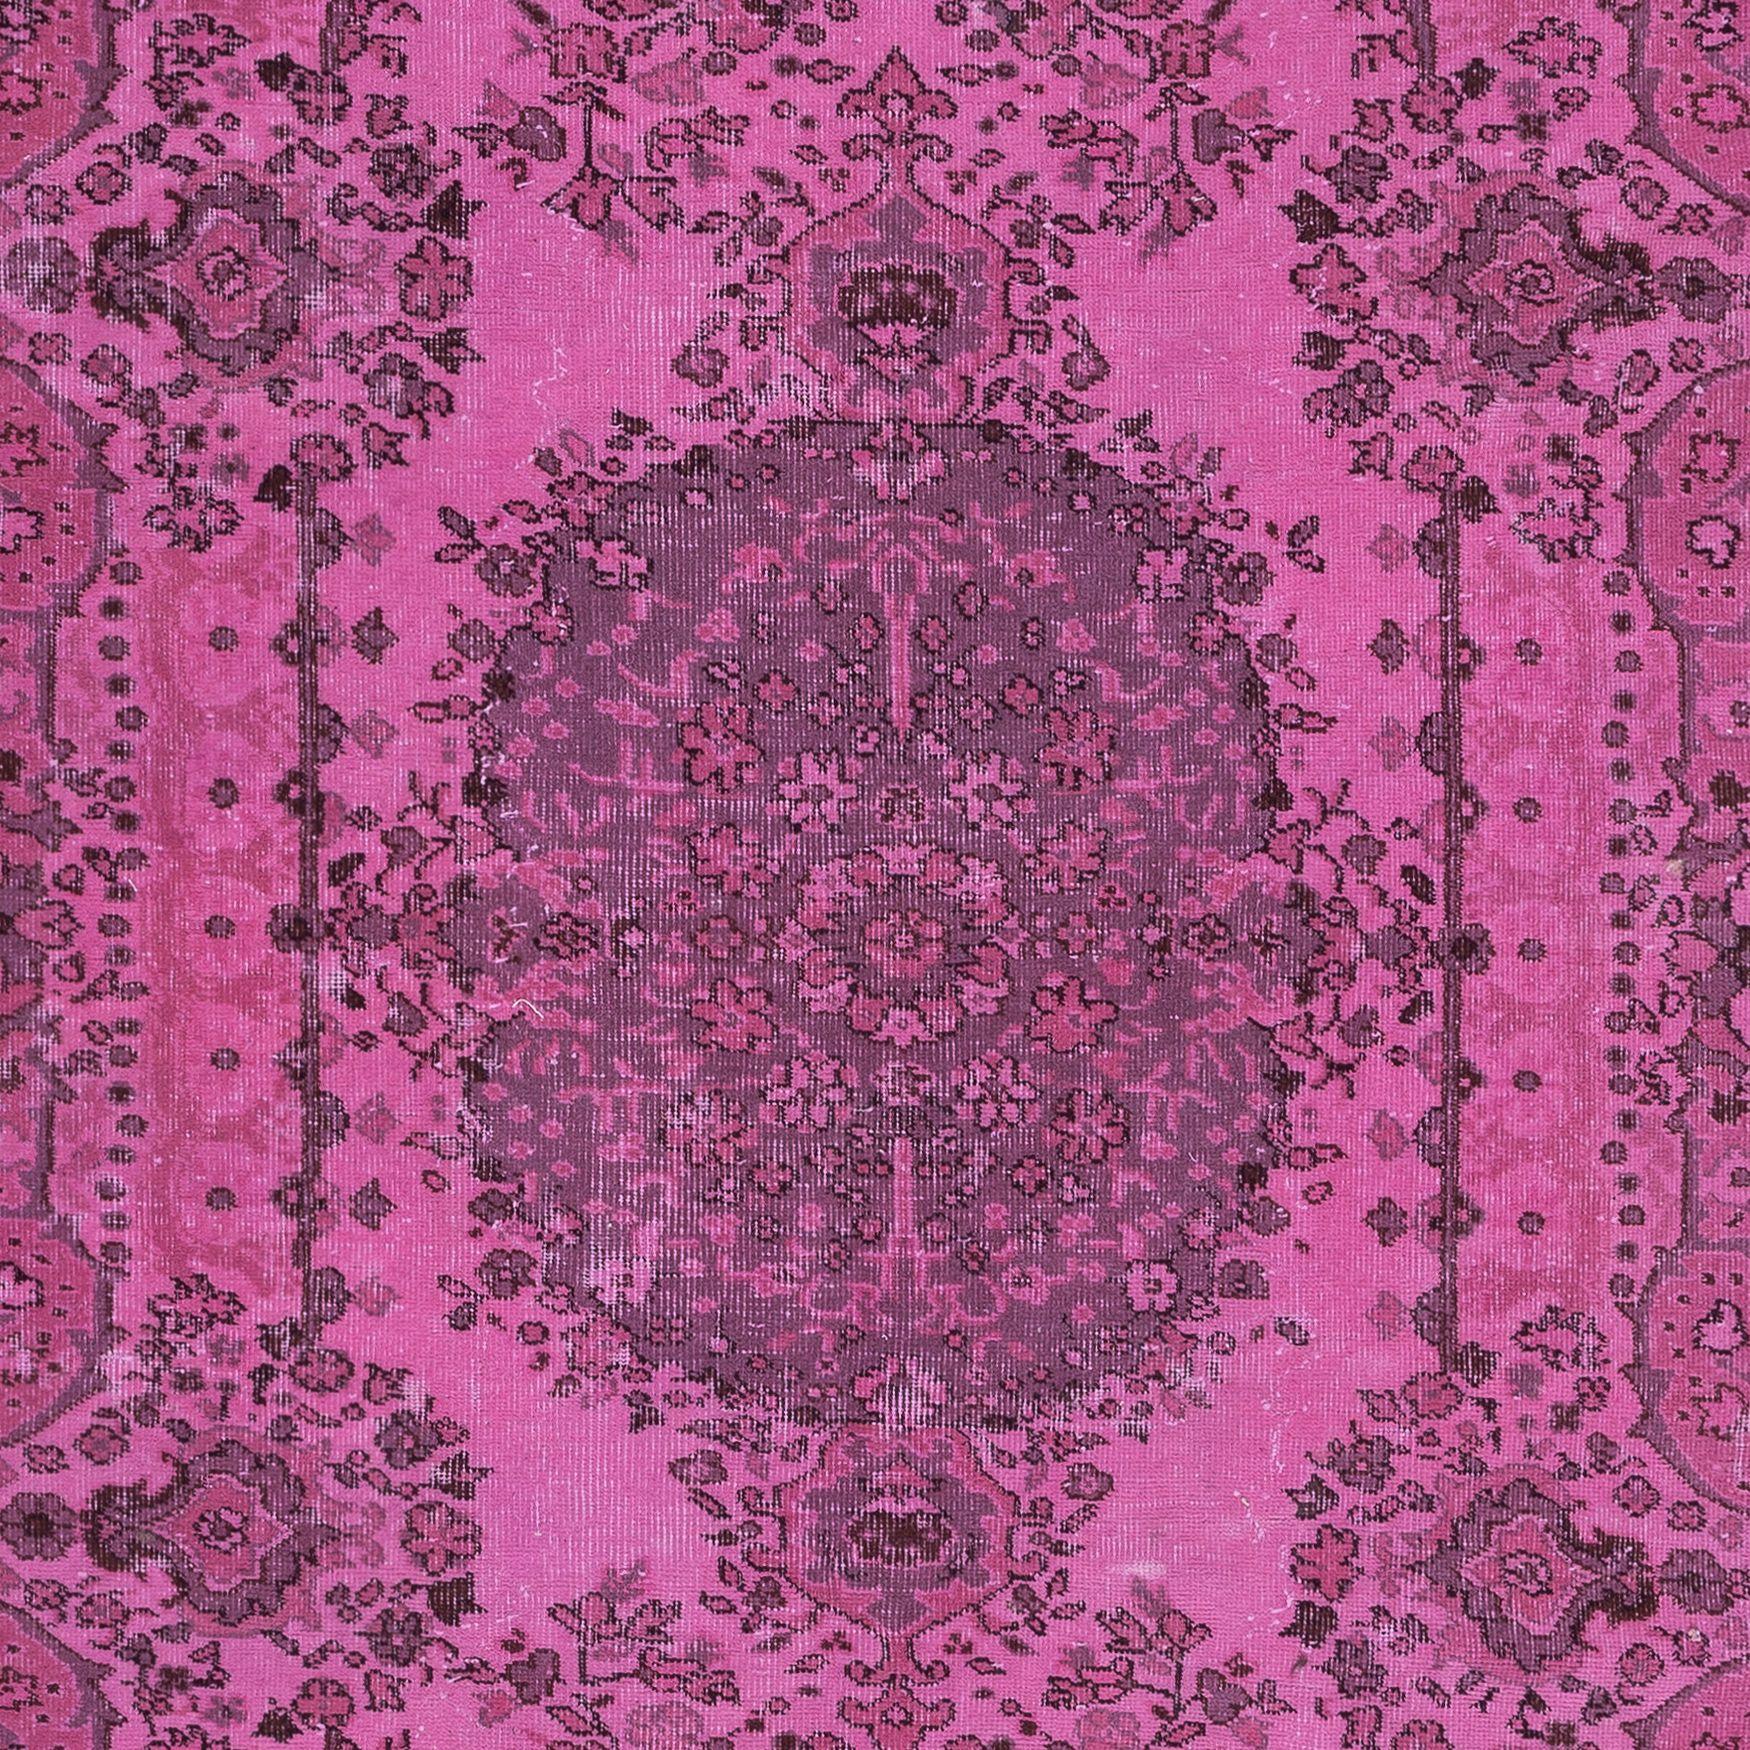 Hand-Knotted 5.6x9.2 Ft Unique Turkish Rug in Pink, Handmade Modern Carpet, Floor Covering For Sale